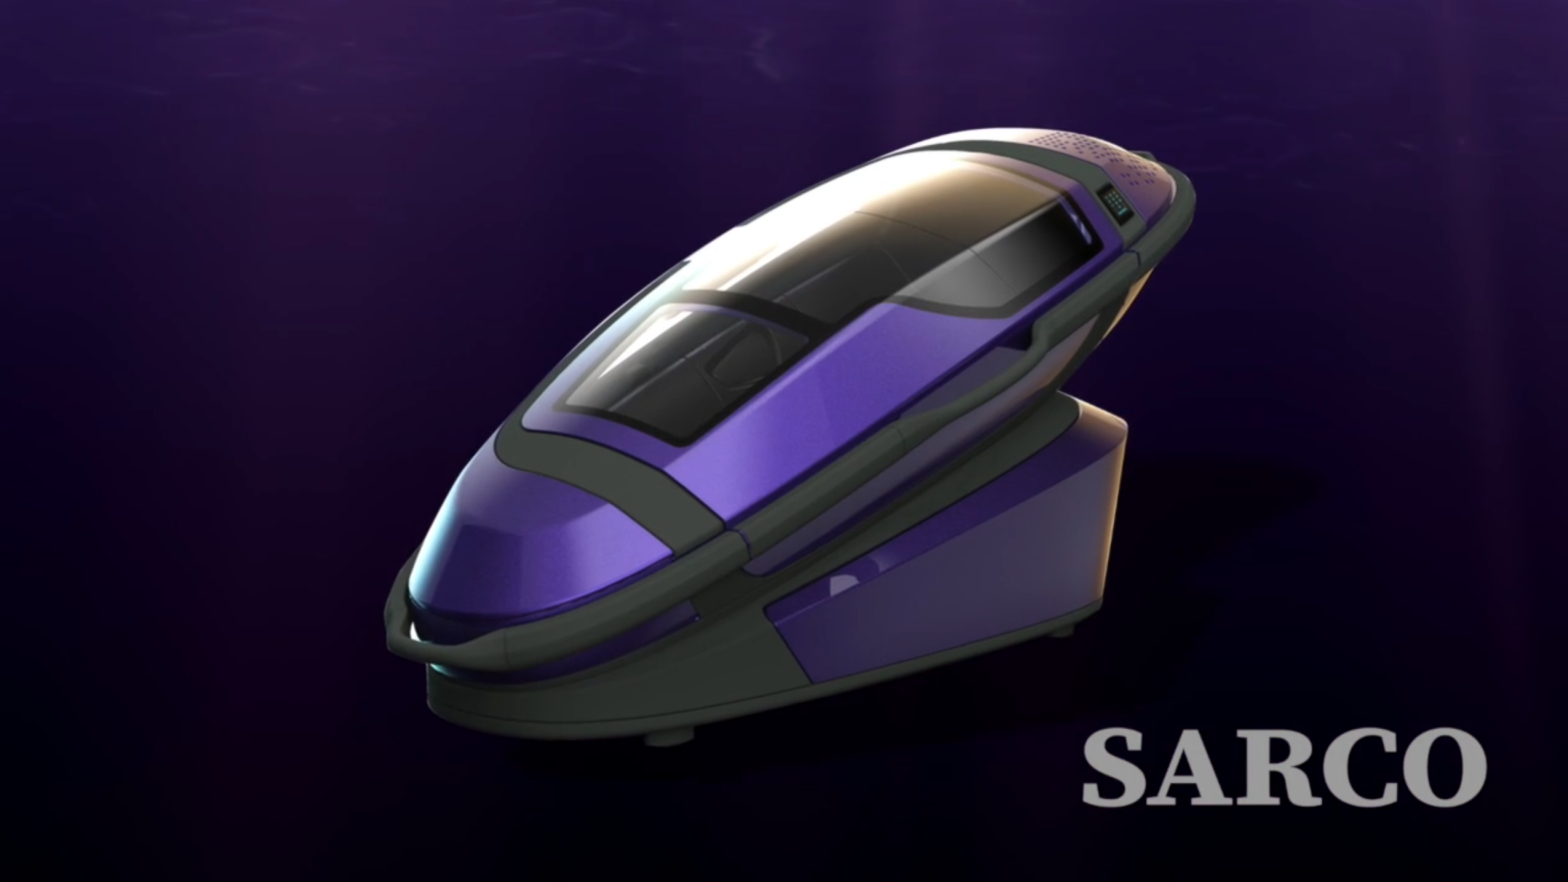 A render of a prototype Sarco device. (Screenshot: Exit International / Vimeo, Fair Use)